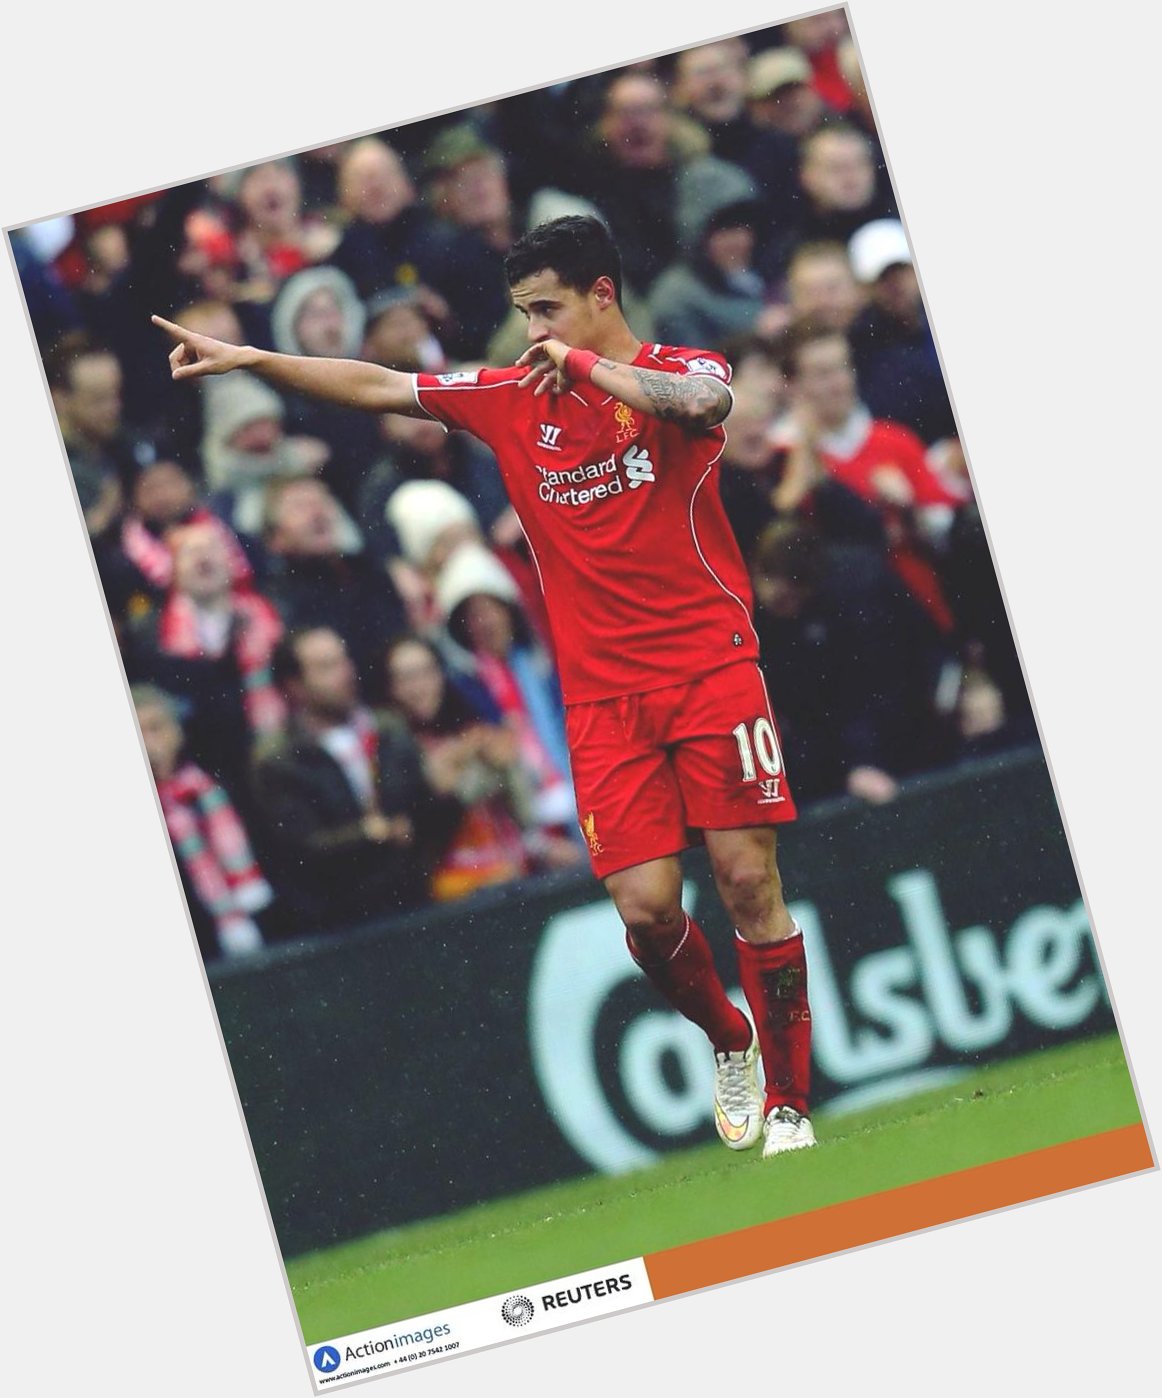 Happy Birthday,lad with a magic in his feet and with passion in his heart!
Philippe Coutinho is 23 today!  